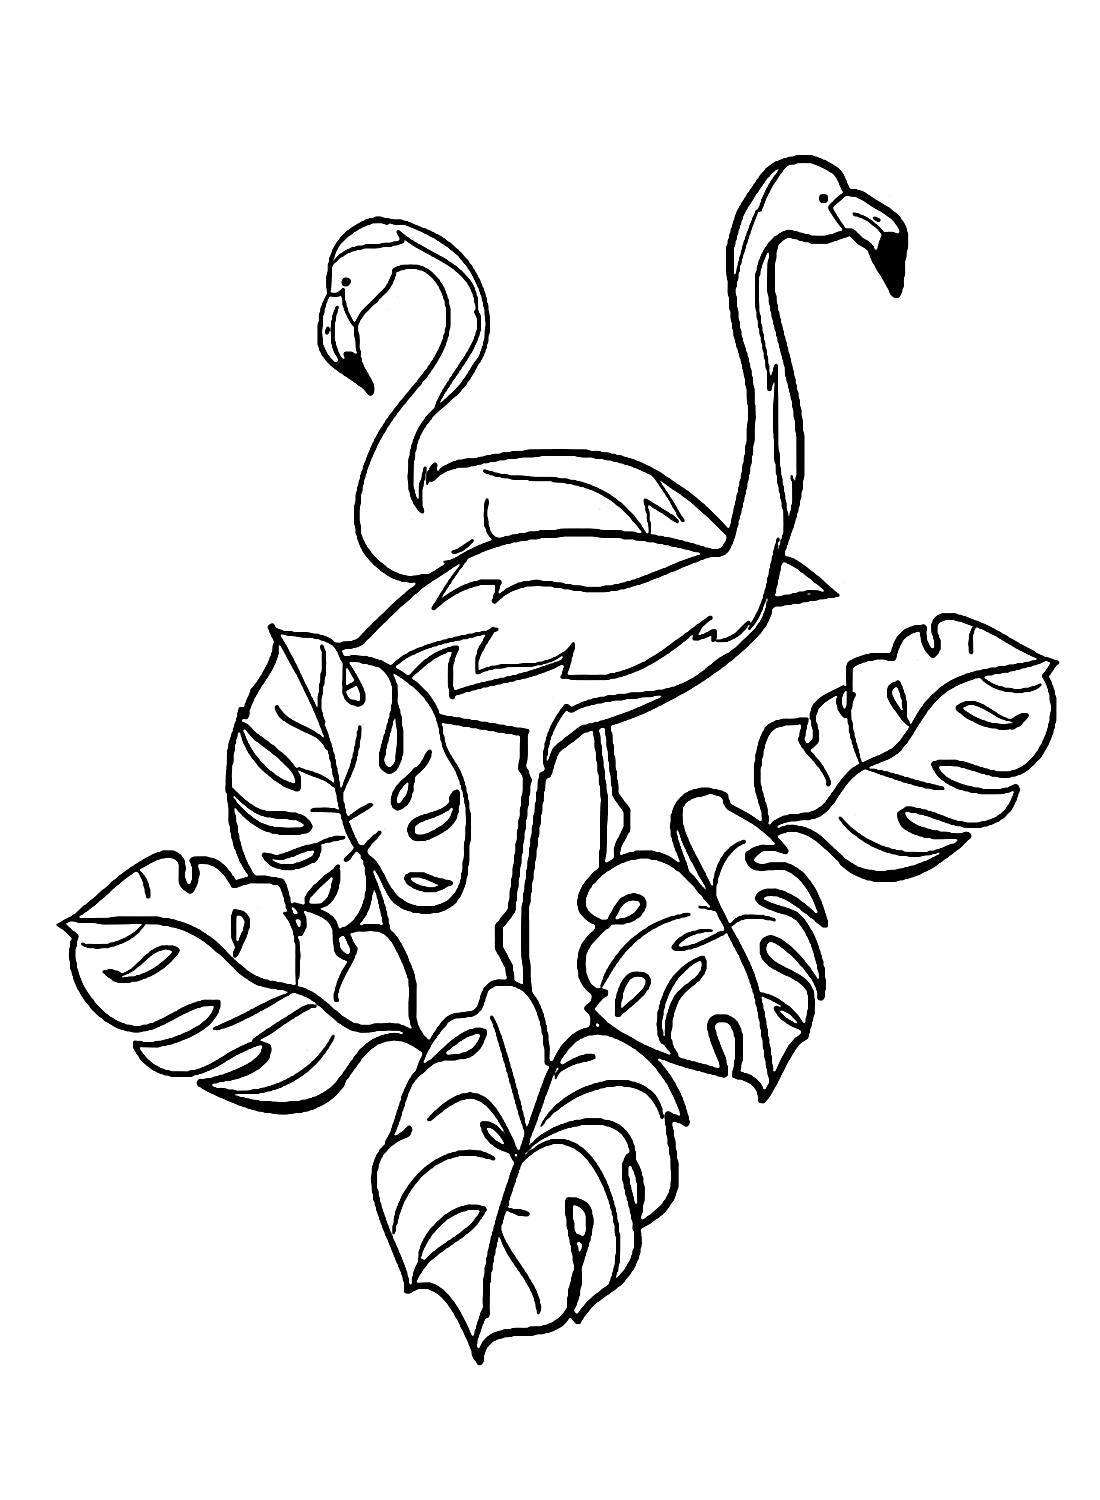 Two Flamingos and Leaves Coloring Page